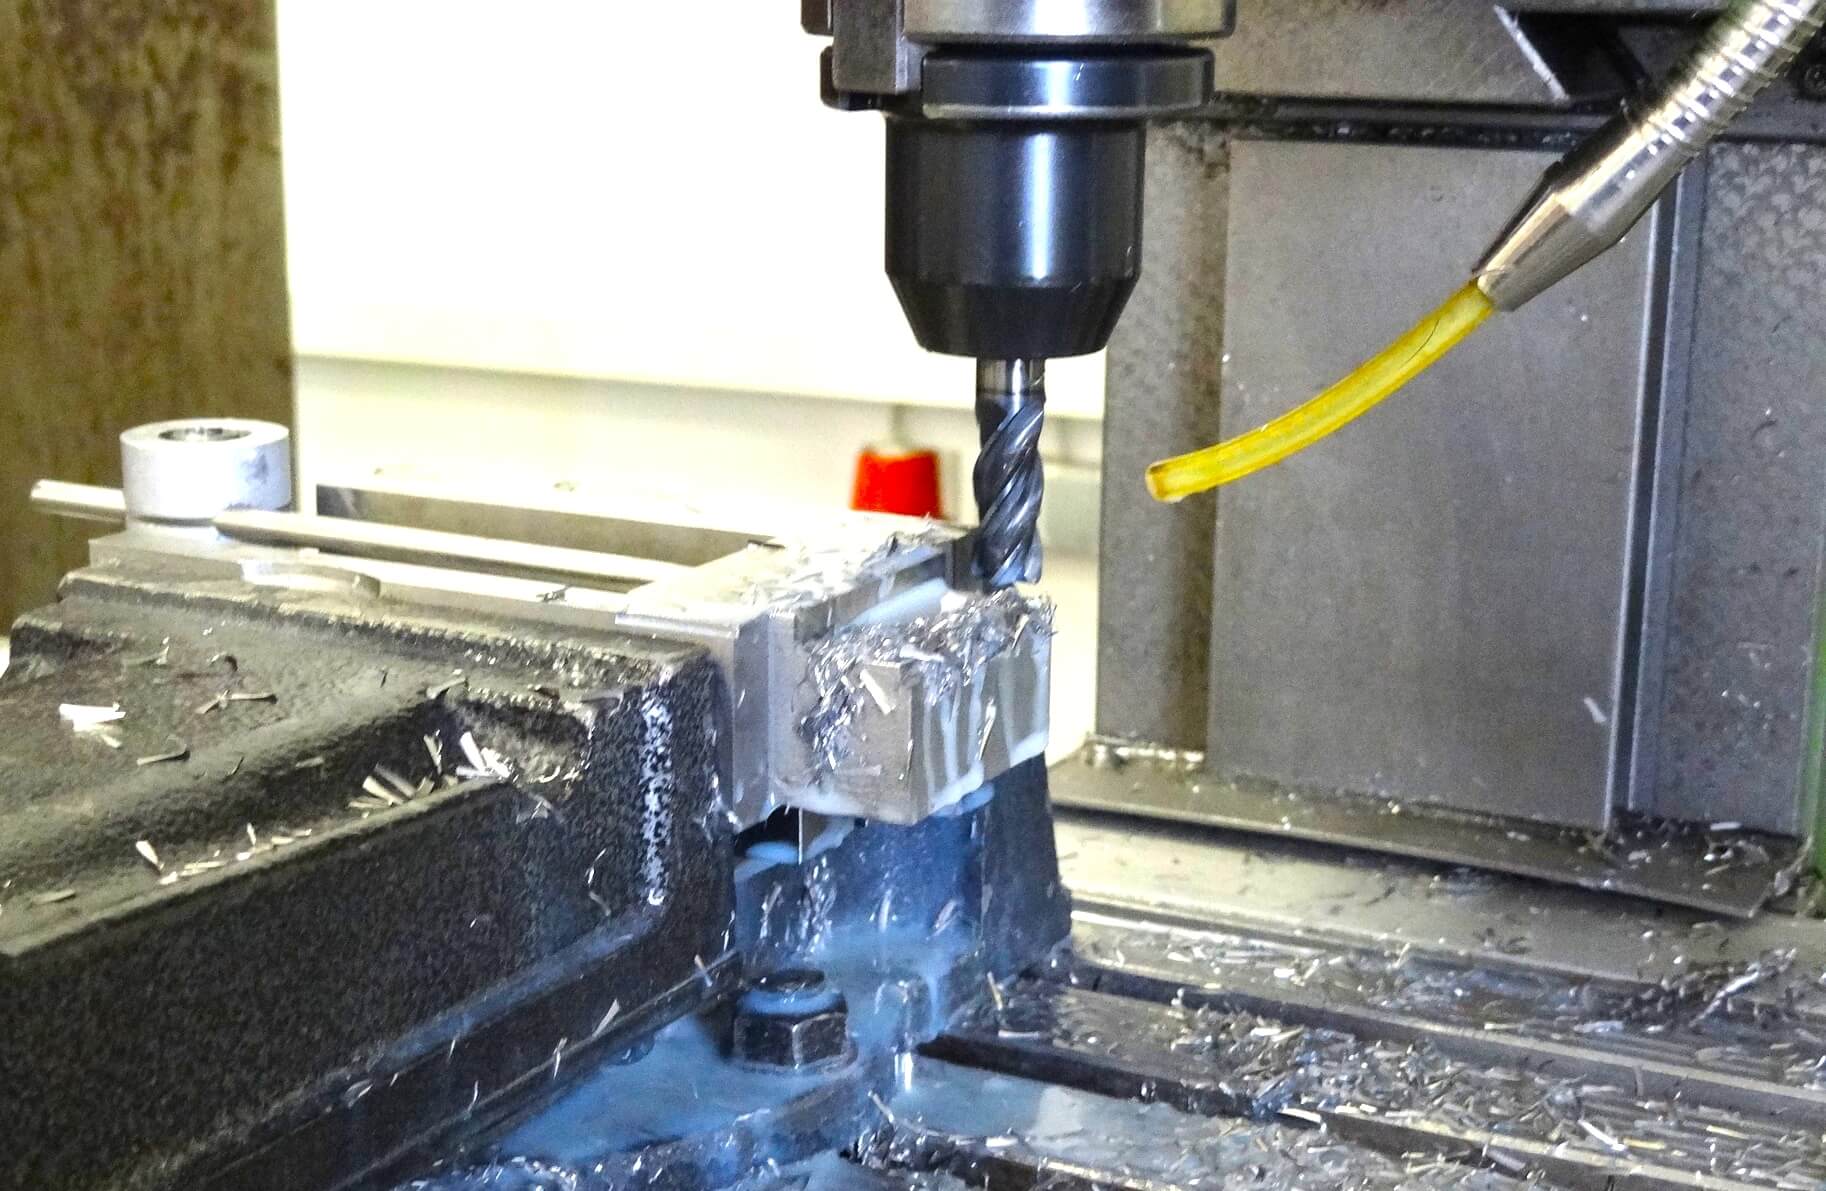 What are the Advantages & Disadvantages of CNC Milling?